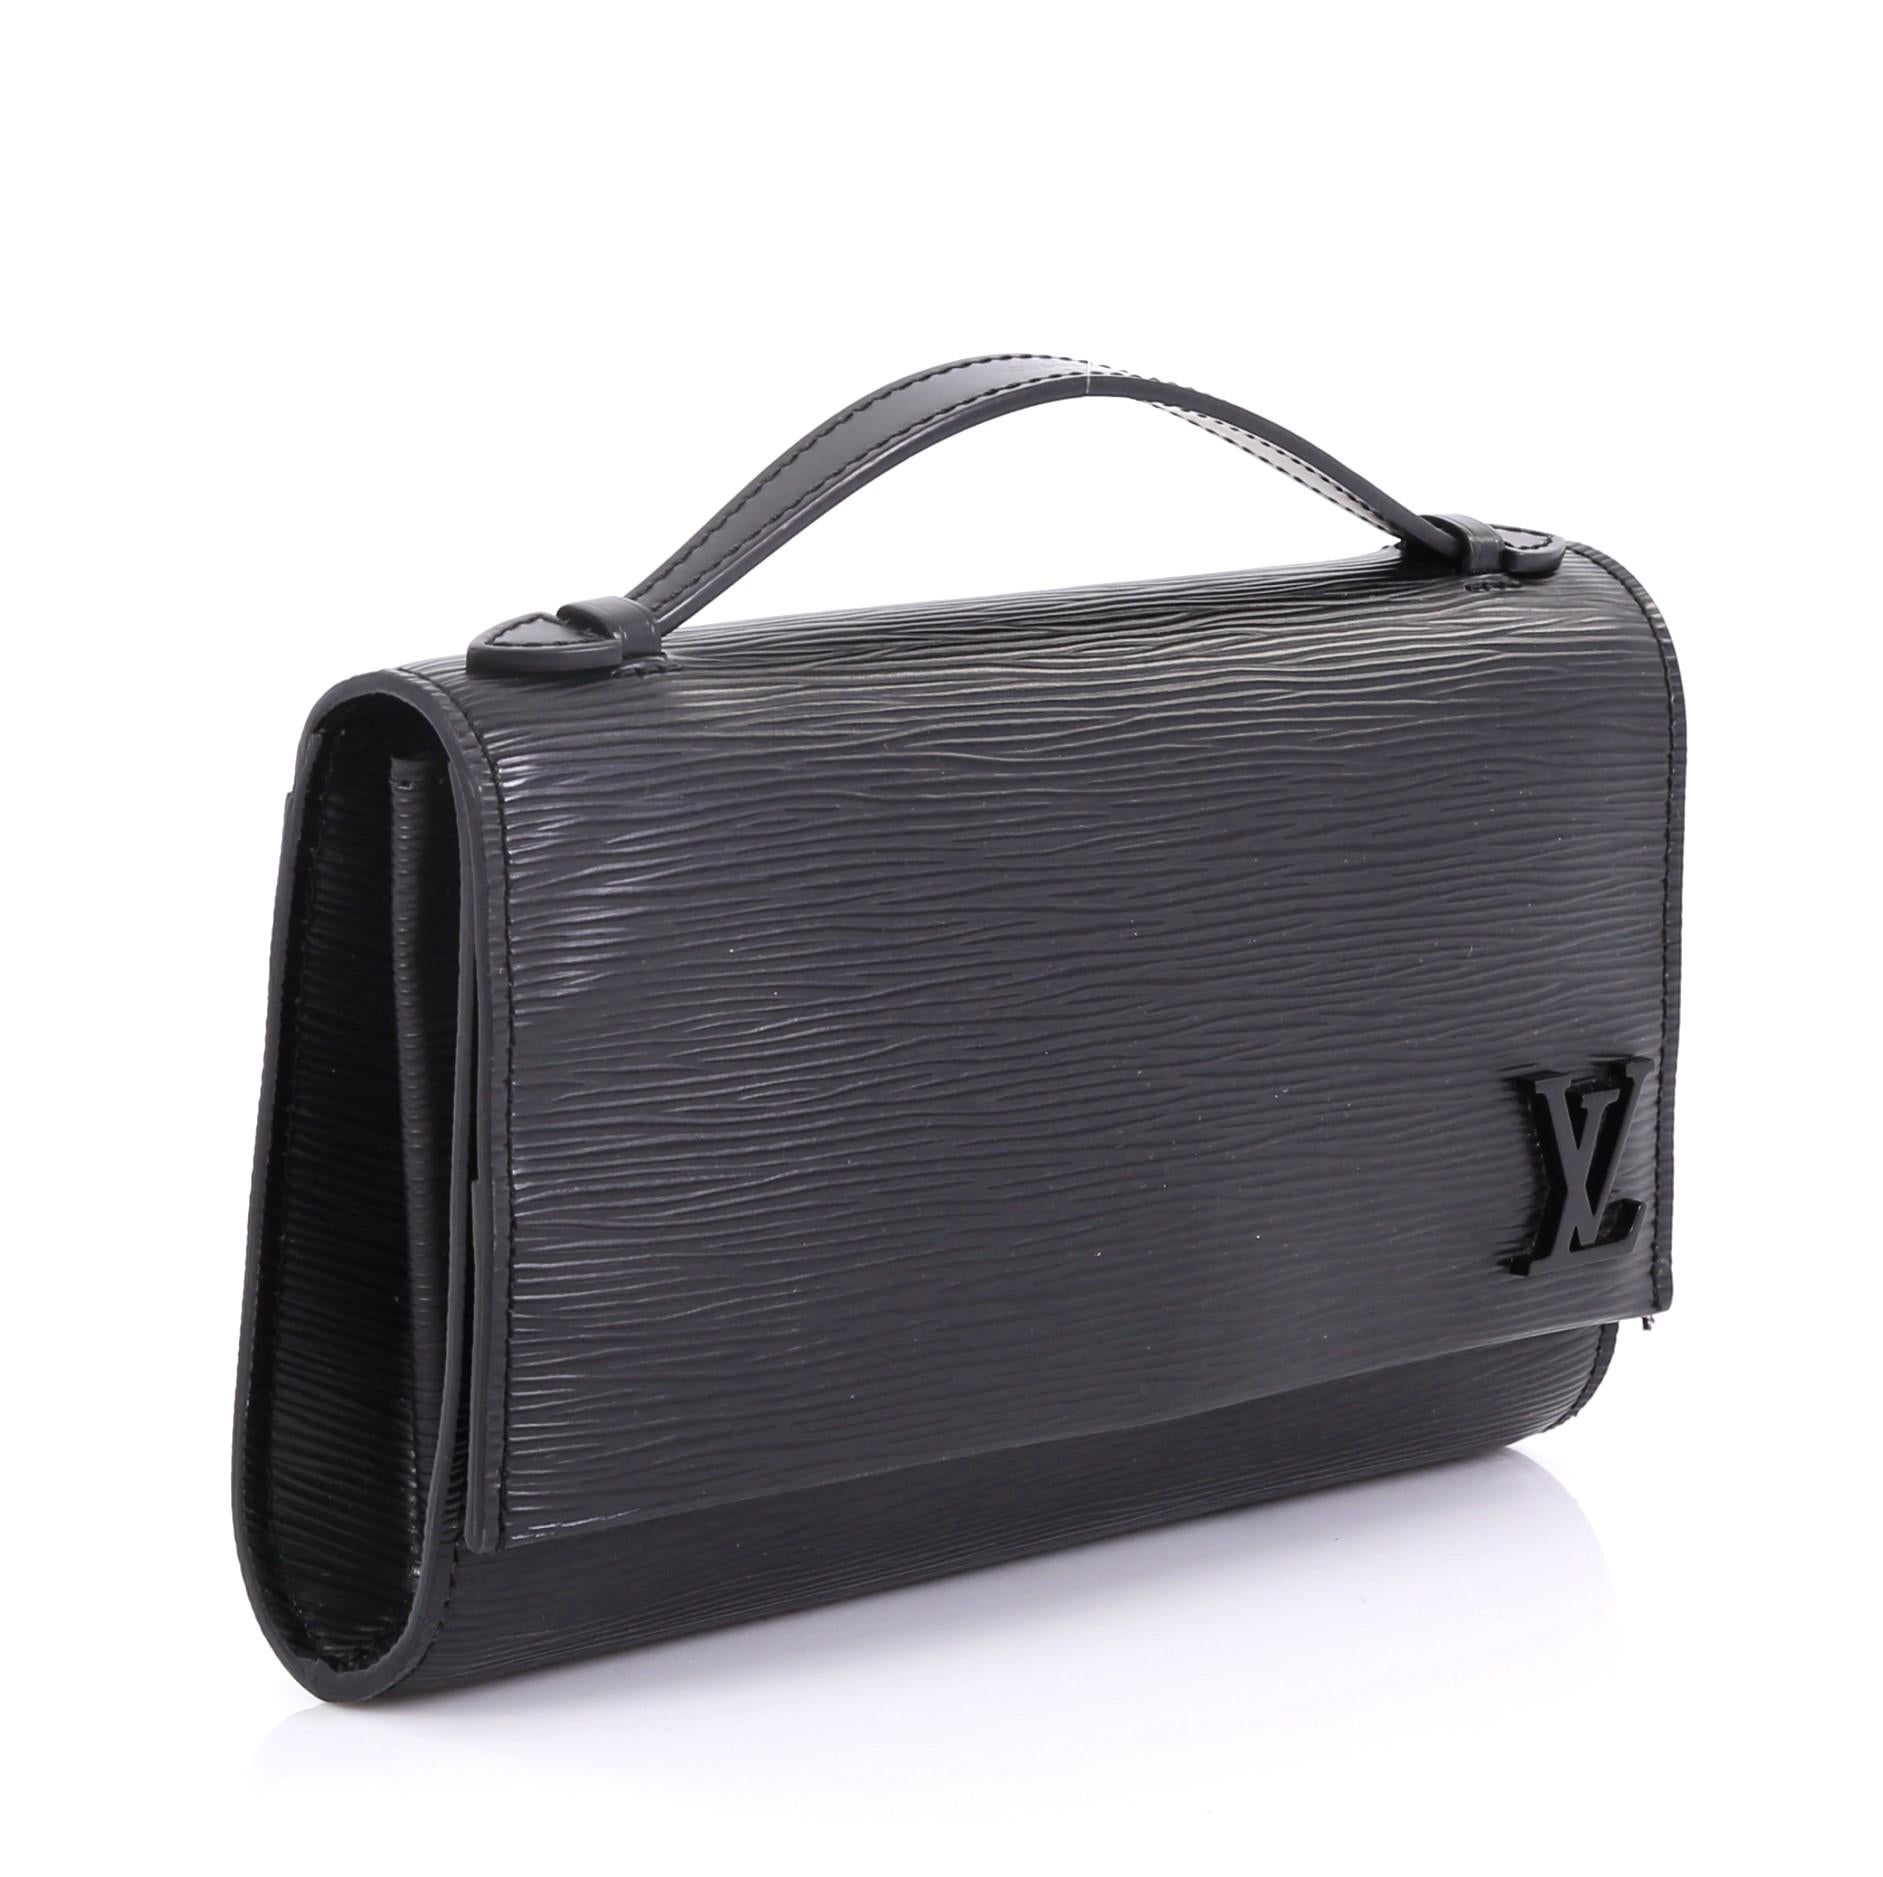 This Louis Vuitton Clery Handbag Epi Leather, crafted in black epi leather, features leather top handle, adjustable leather strap, frontal flap with subtle LV logo and silver-tone hardware. Its hidden magnetic snap closure opens to a black fabric